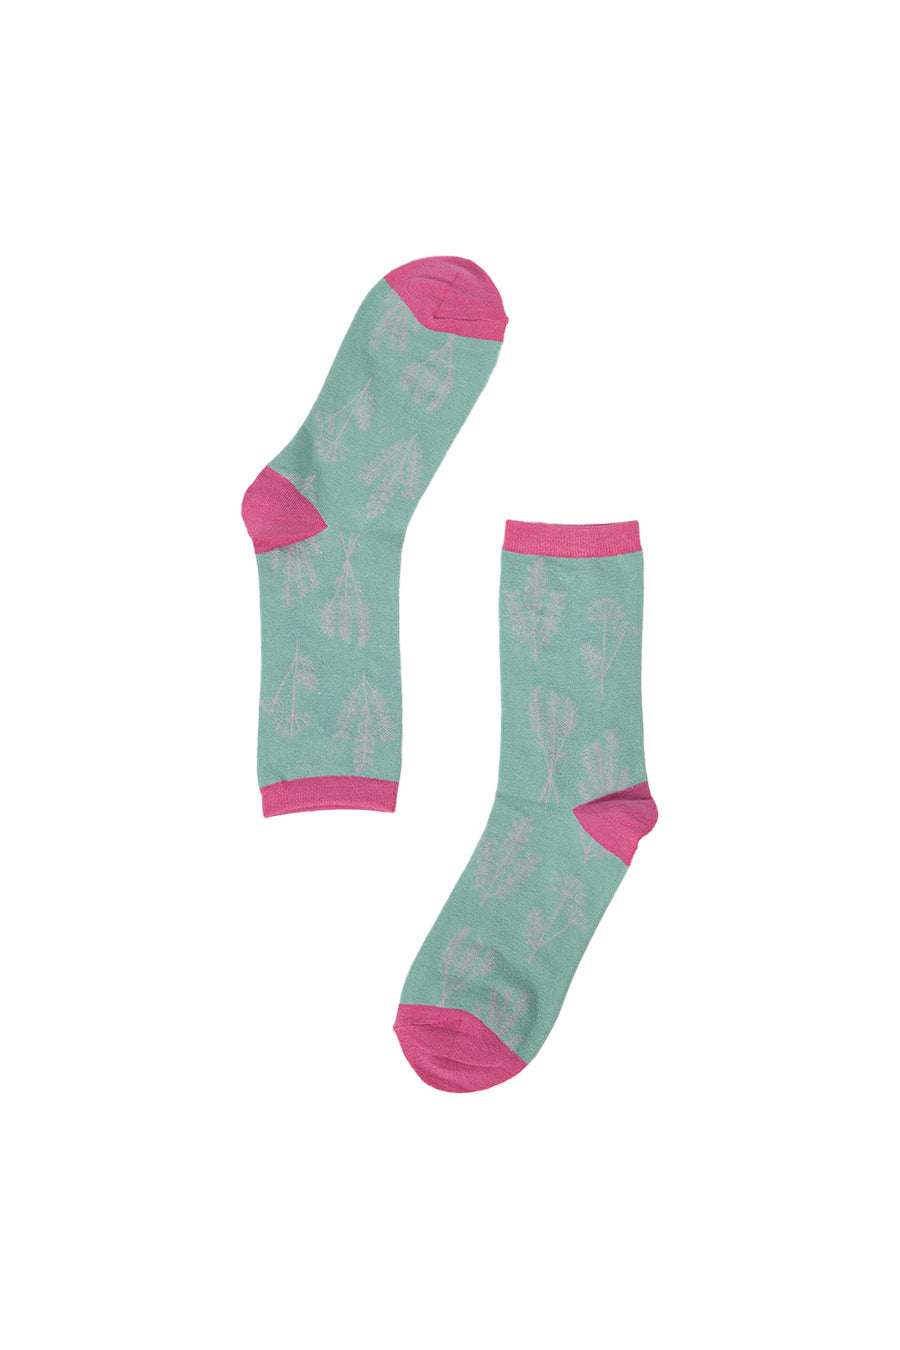 Womens Bamboo Socks Floral Ankle Socks Wild Flowers Green Pink